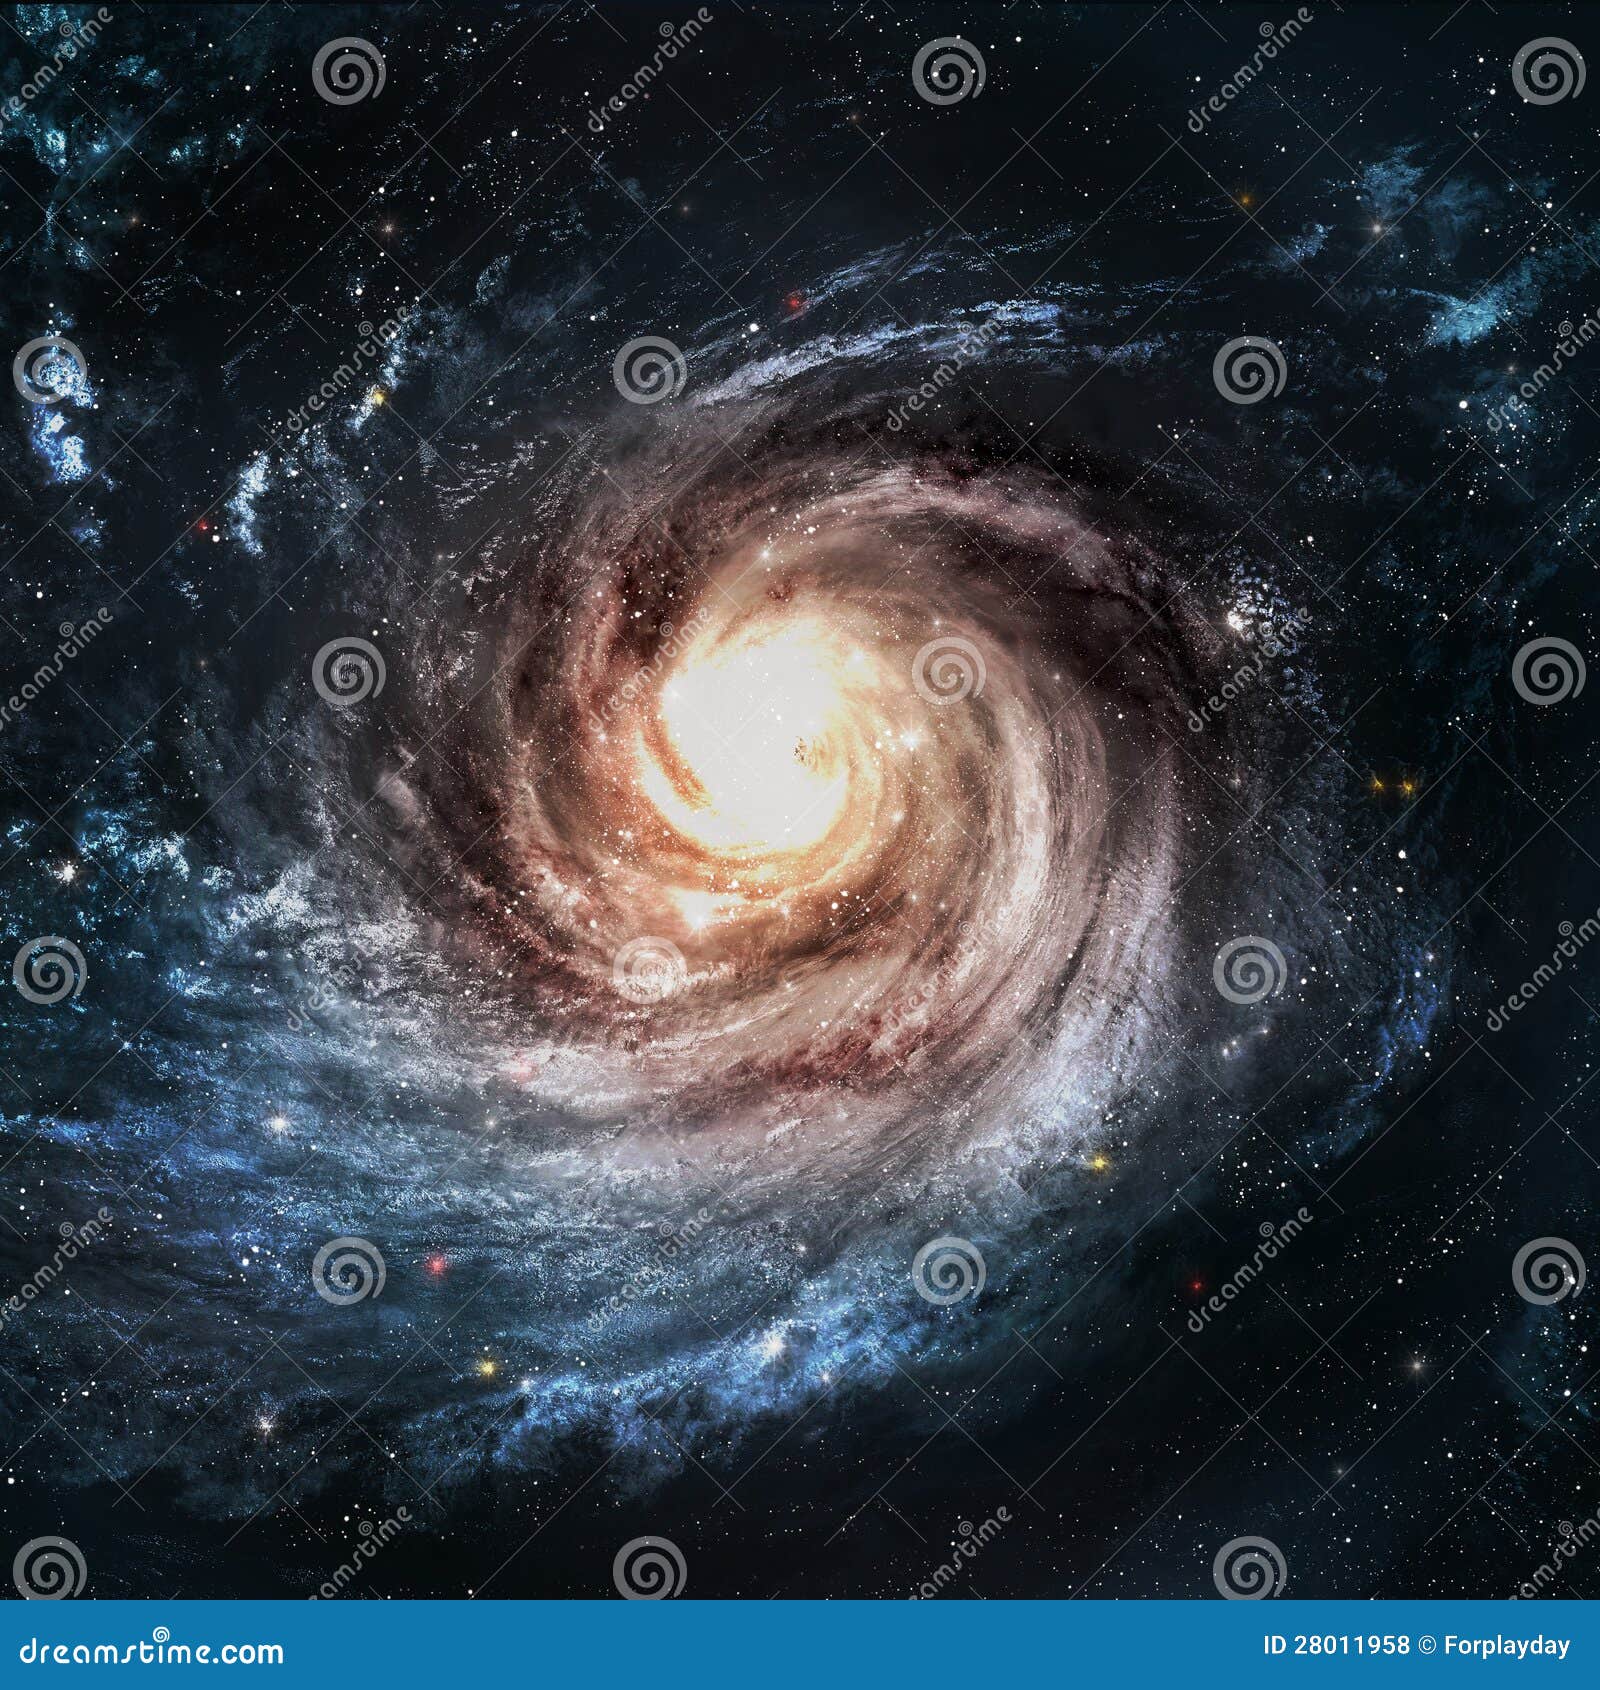 incredibly beautiful spiral galaxy somewhere in